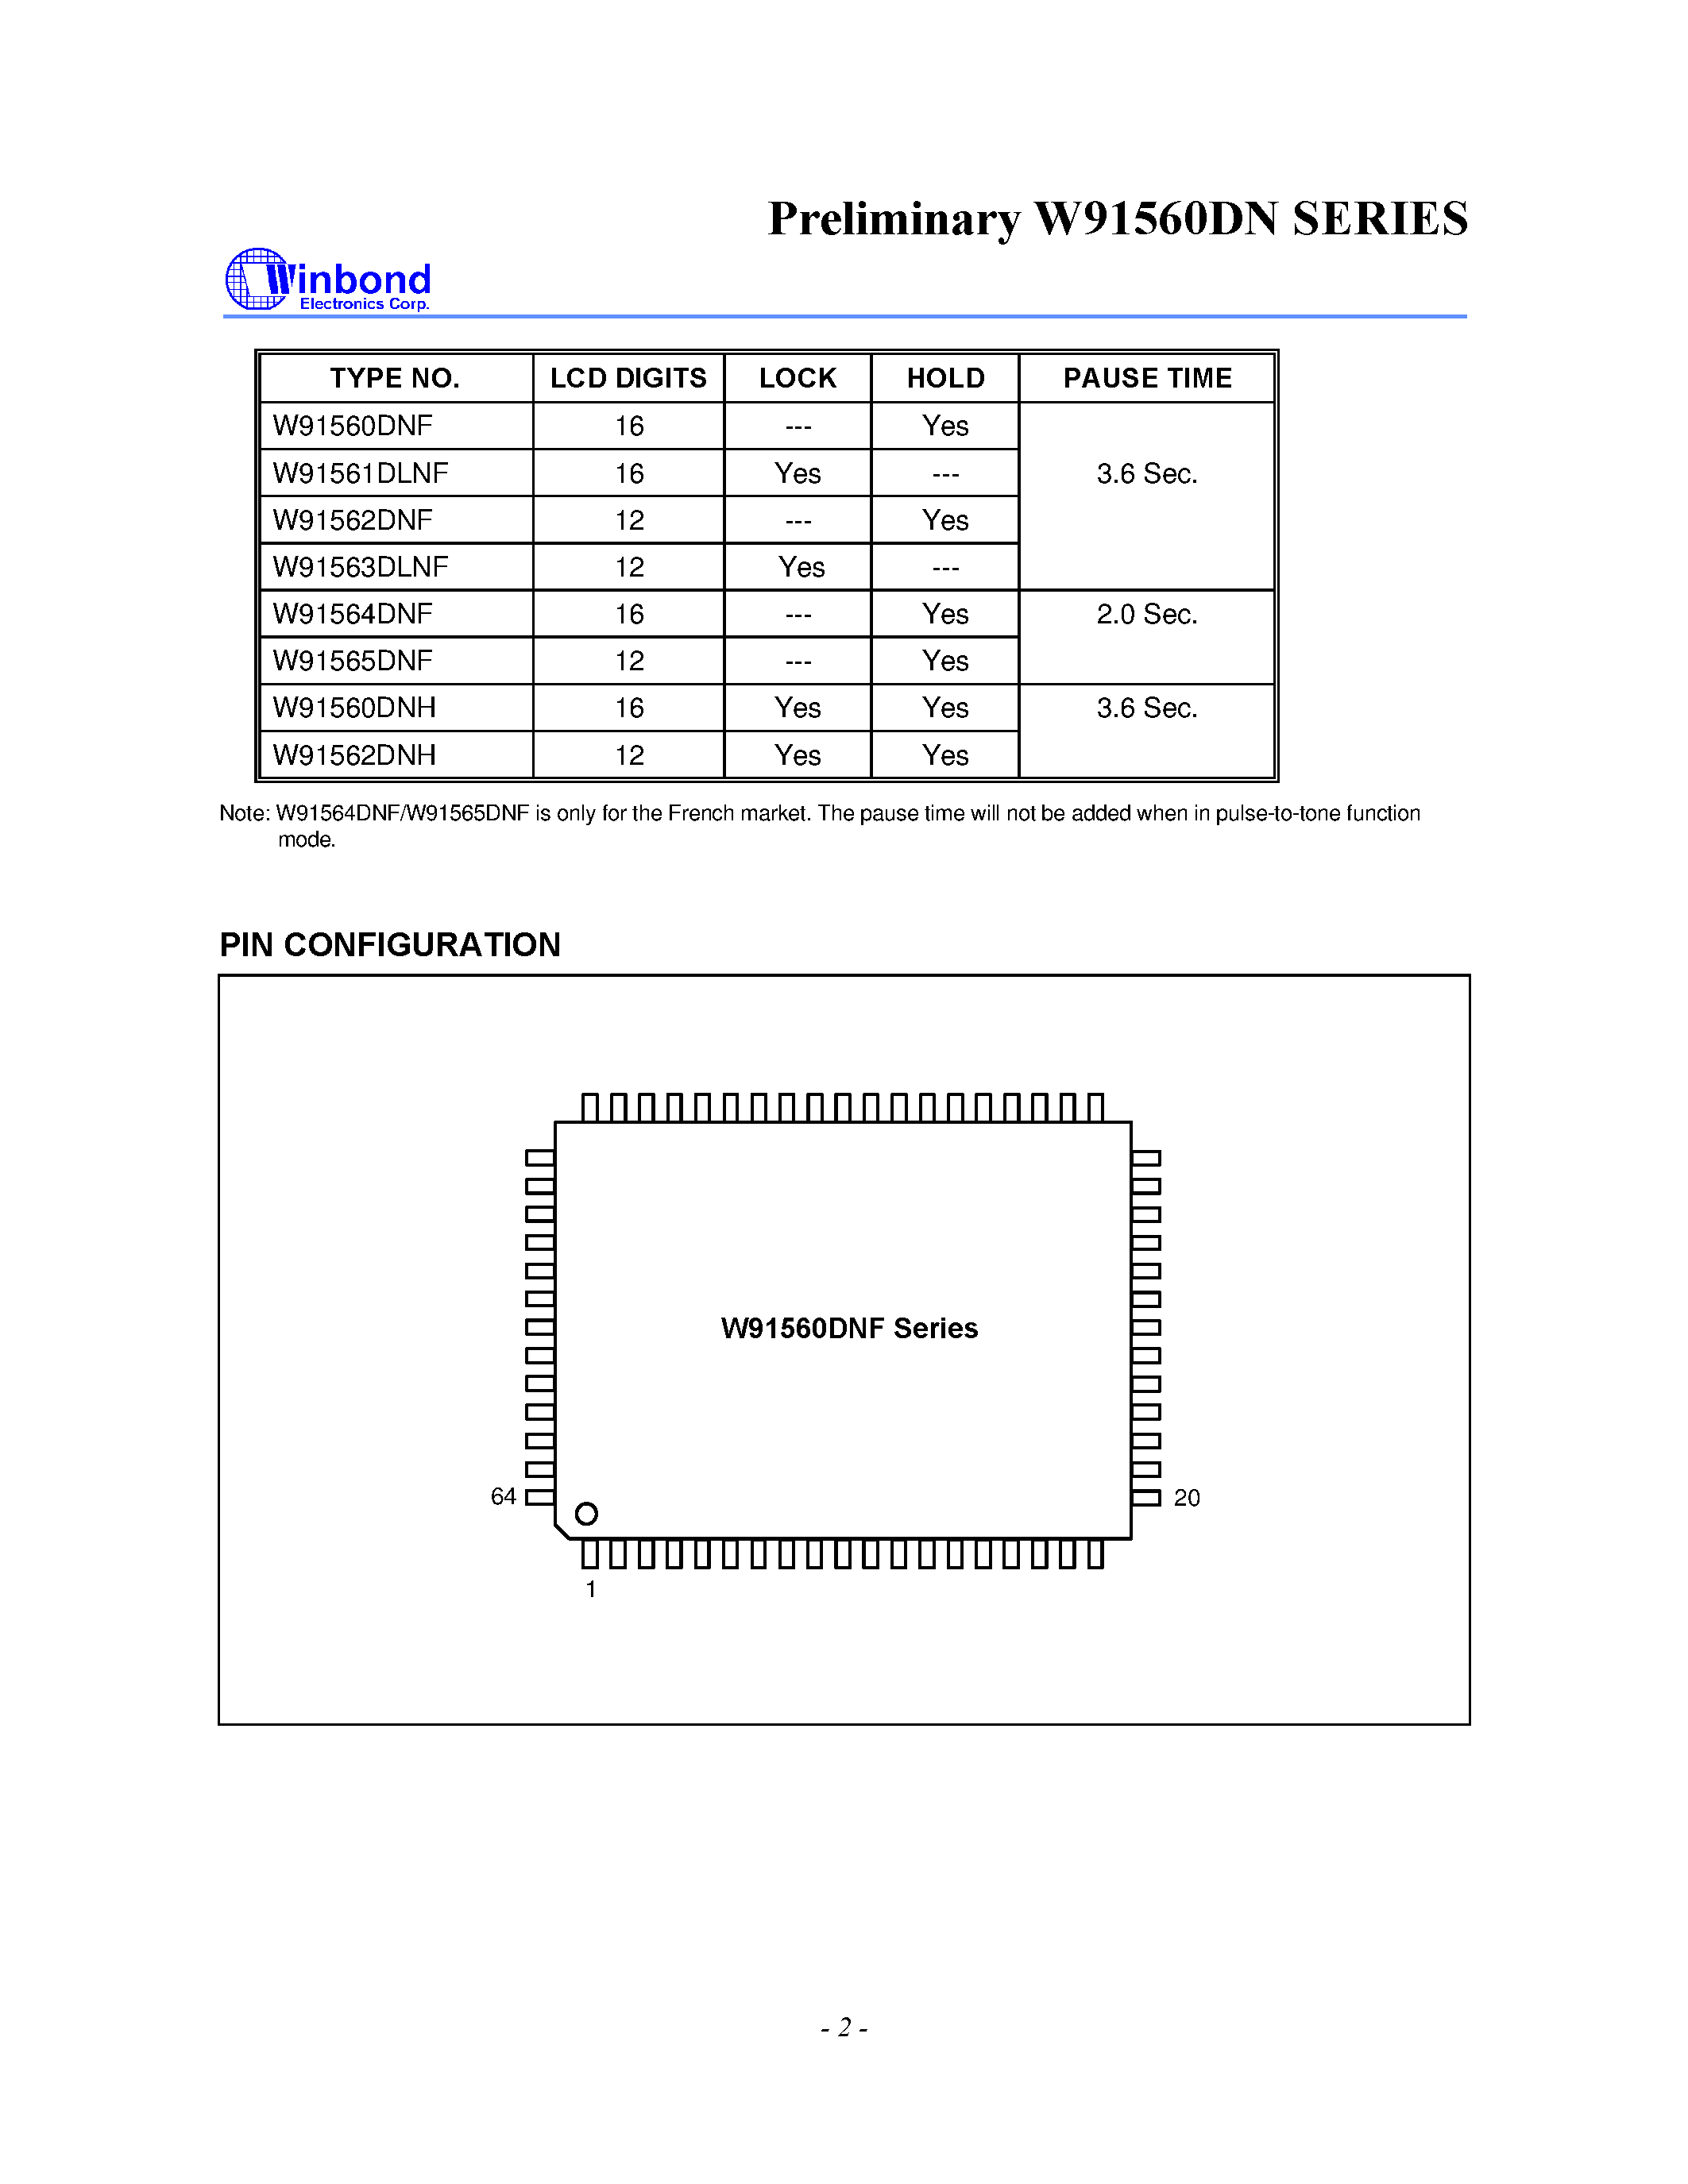 Datasheet W91560DNH - 3-MEMORY TONE/PULSE DIALER WITH RTC AND LCD DISPALY FUNCTIONS page 2